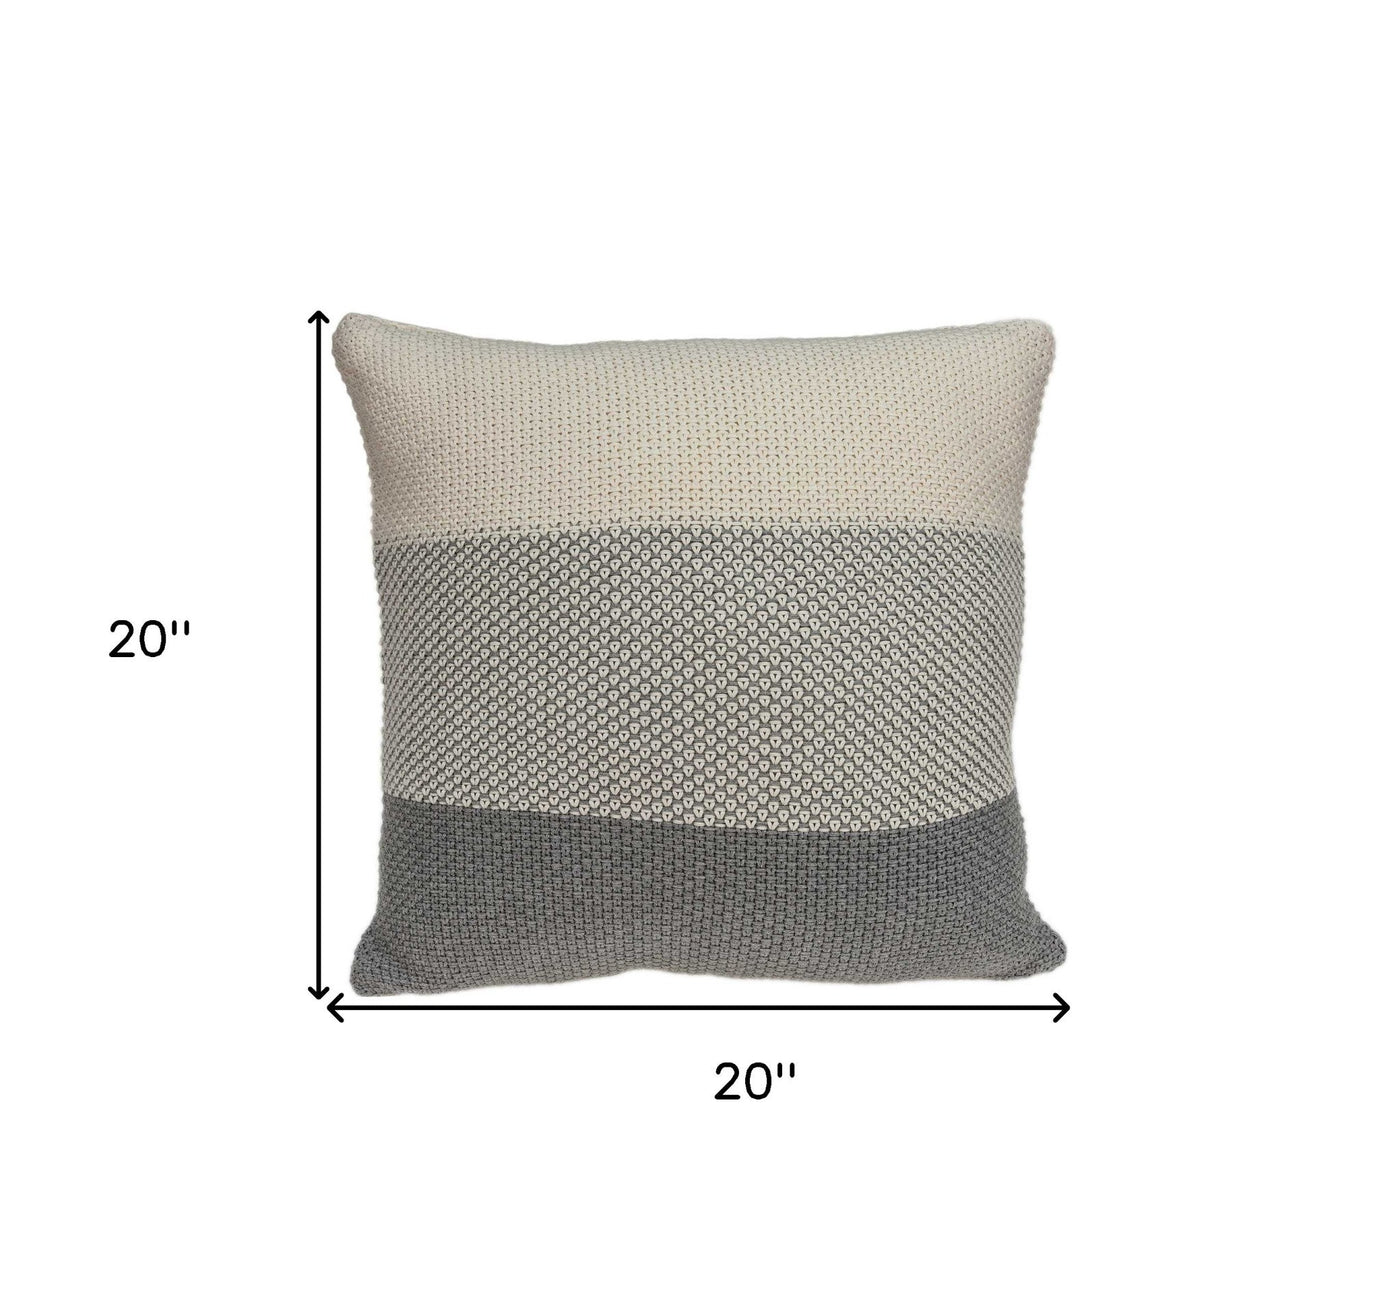 20’ X 7’ X 20’ Transitional Tan Cotton Pillow Cover With Poly Insert - Accent Throw Pillows